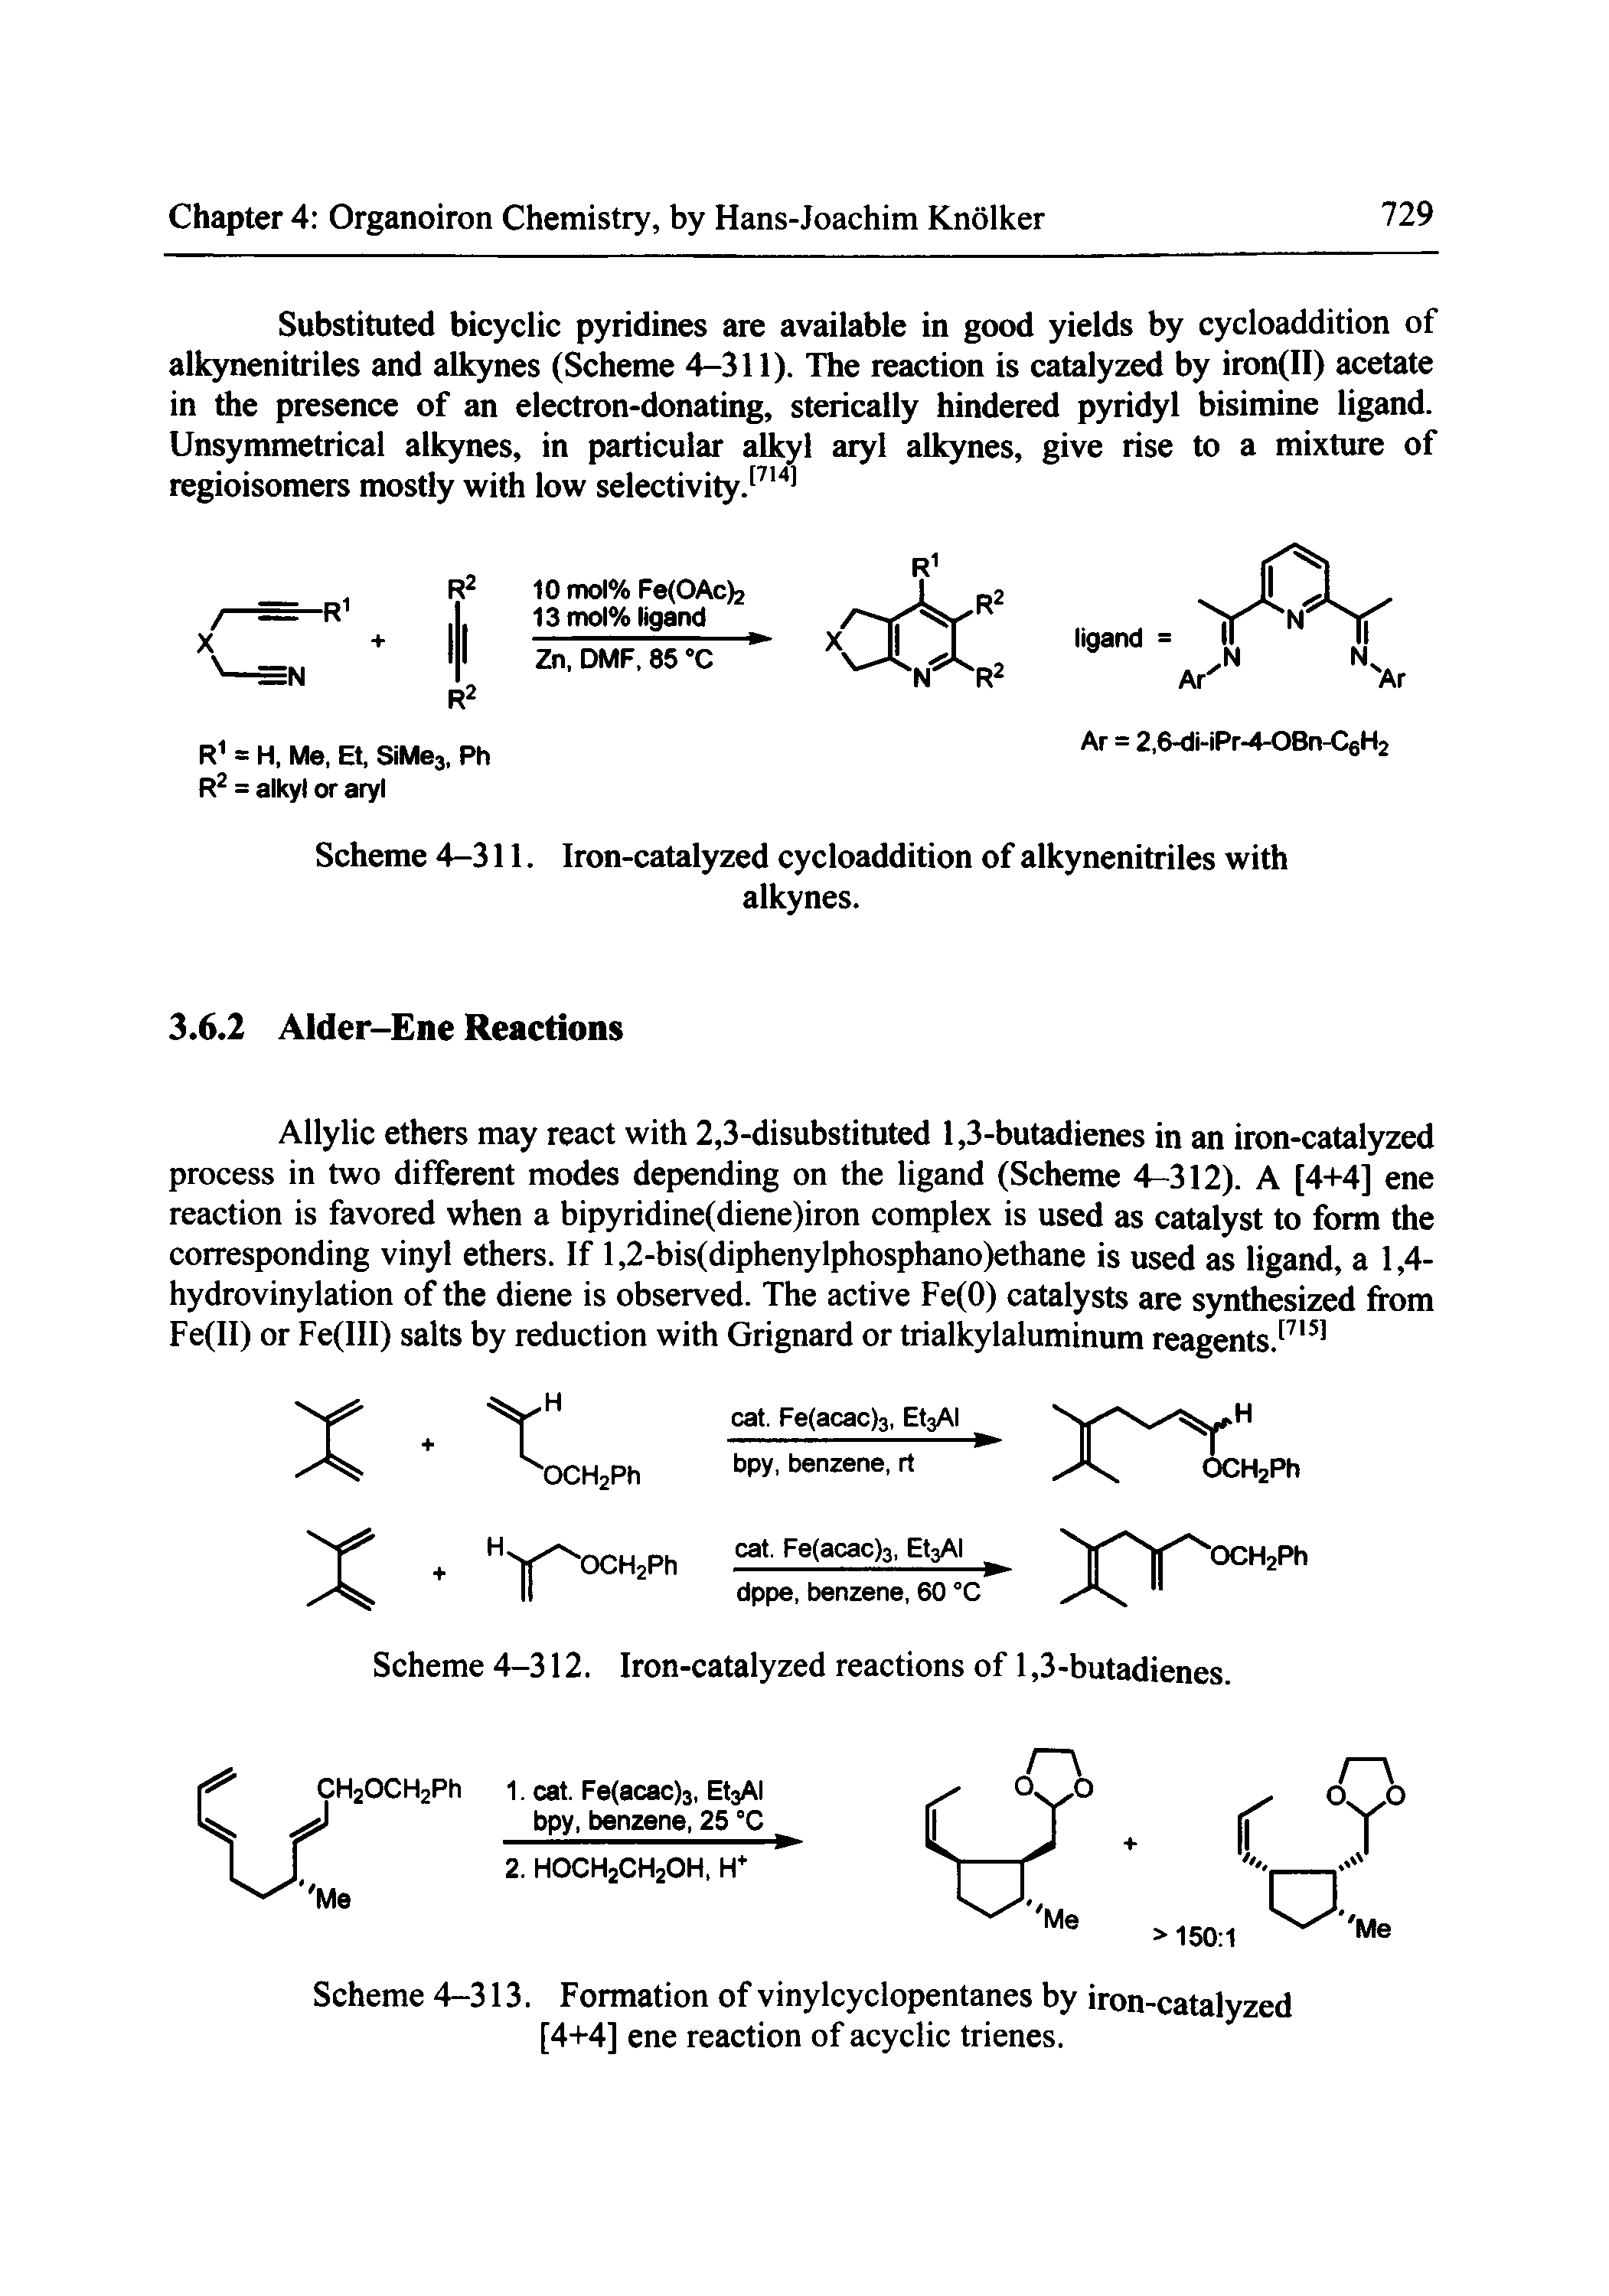 Scheme 4-313. Formation of vinylcyclopentanes by iron-catalyzed [4+4] ene reaction of acyclic trienes.